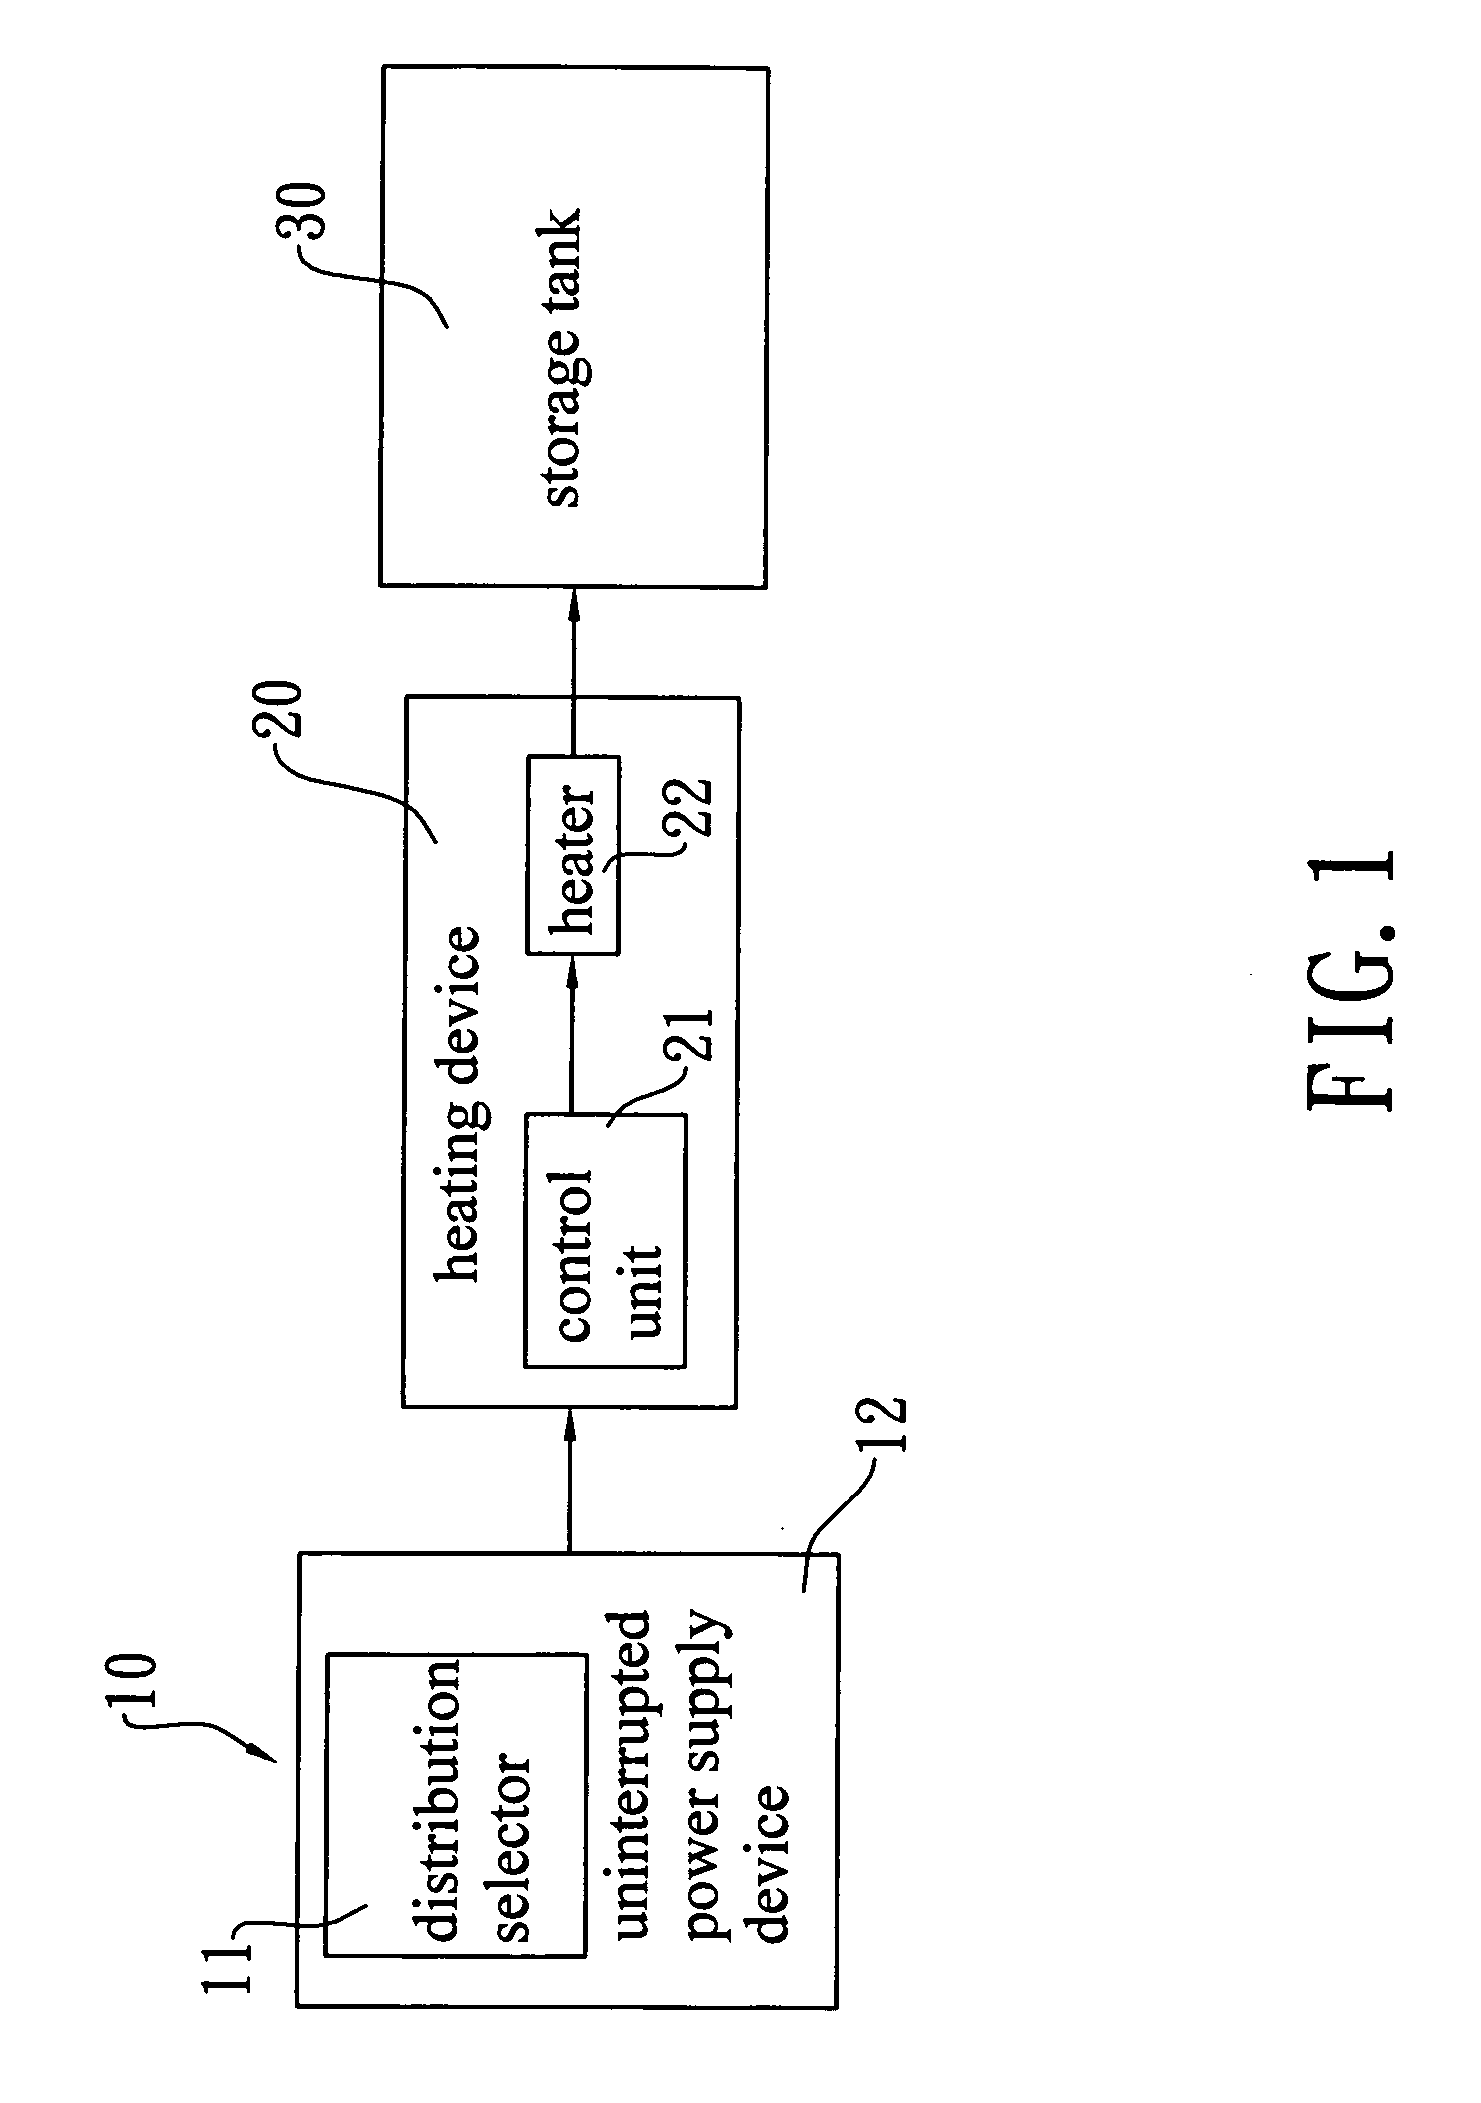 Multiple-power-selection heat storage device